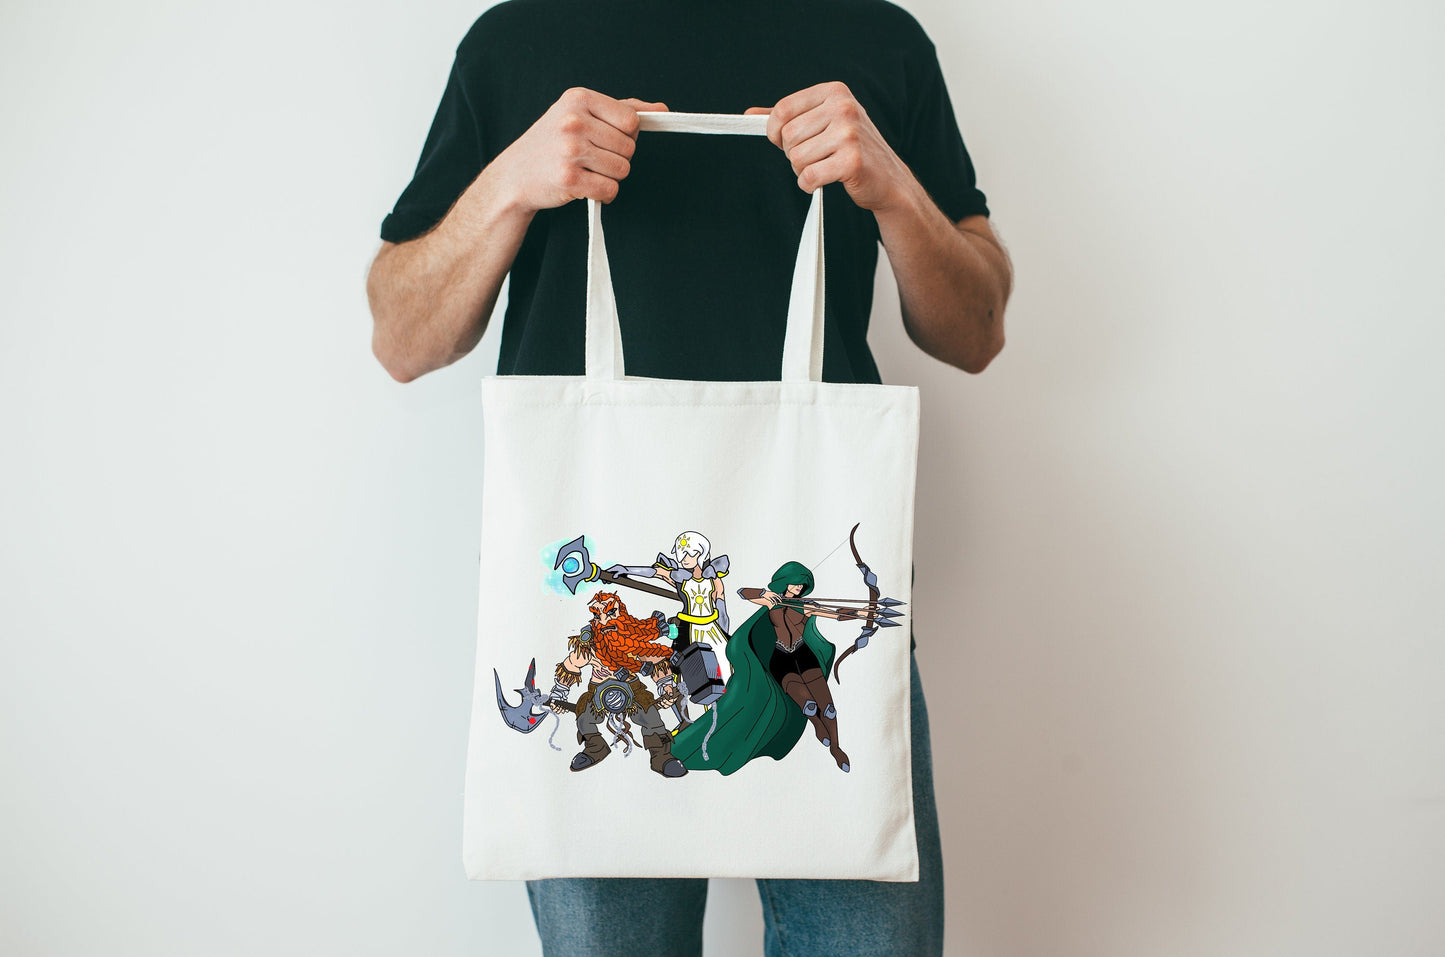 Personalised Ain't No Party, Like a D&D Party, DnD White Tote Bag - Resplendent Aurora